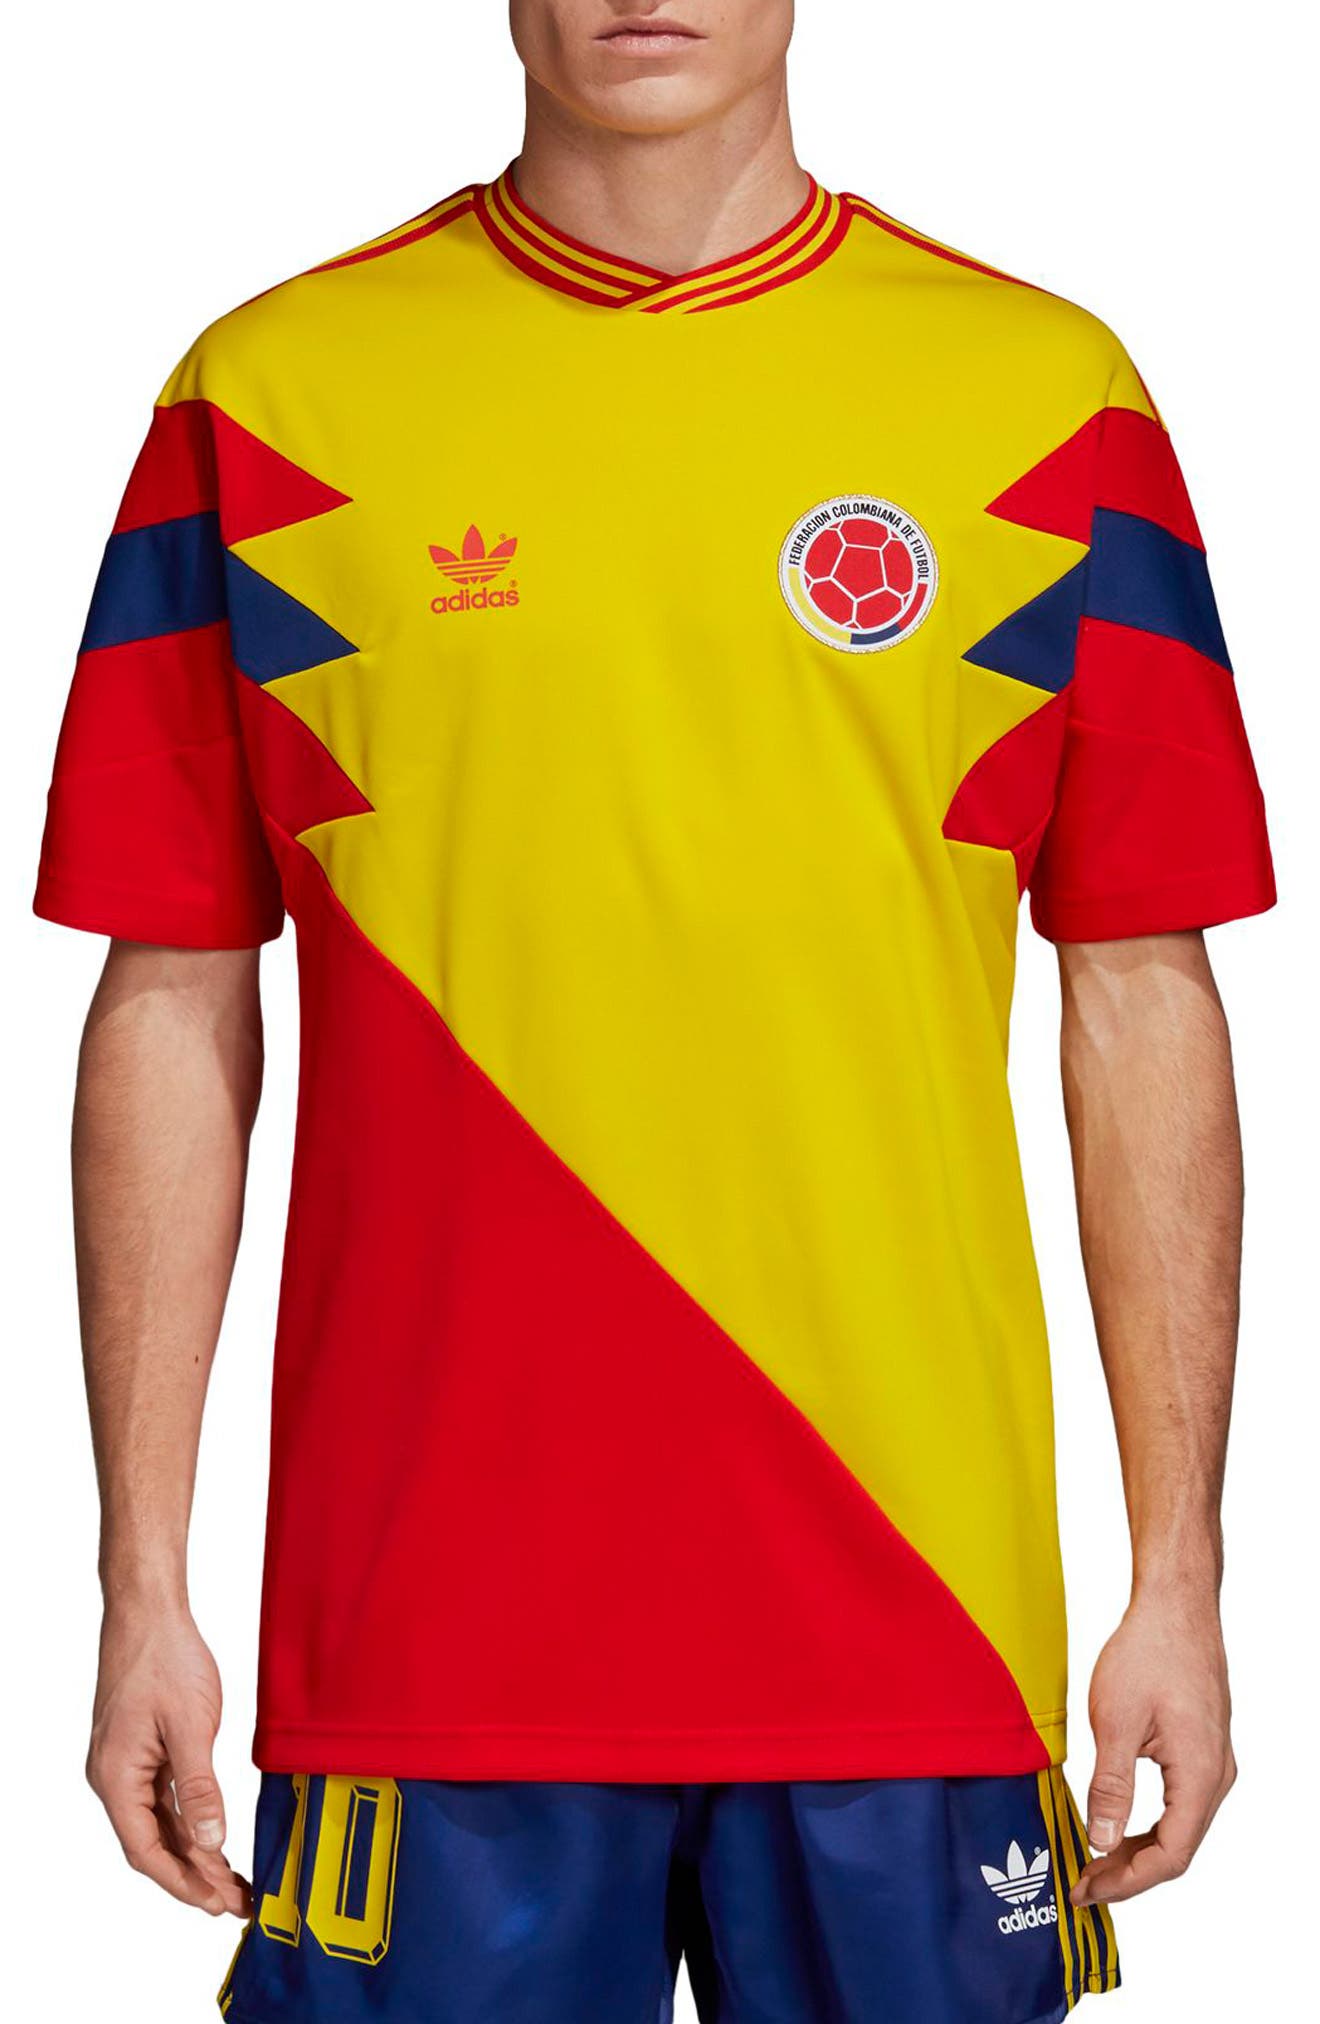 red colombia jersey